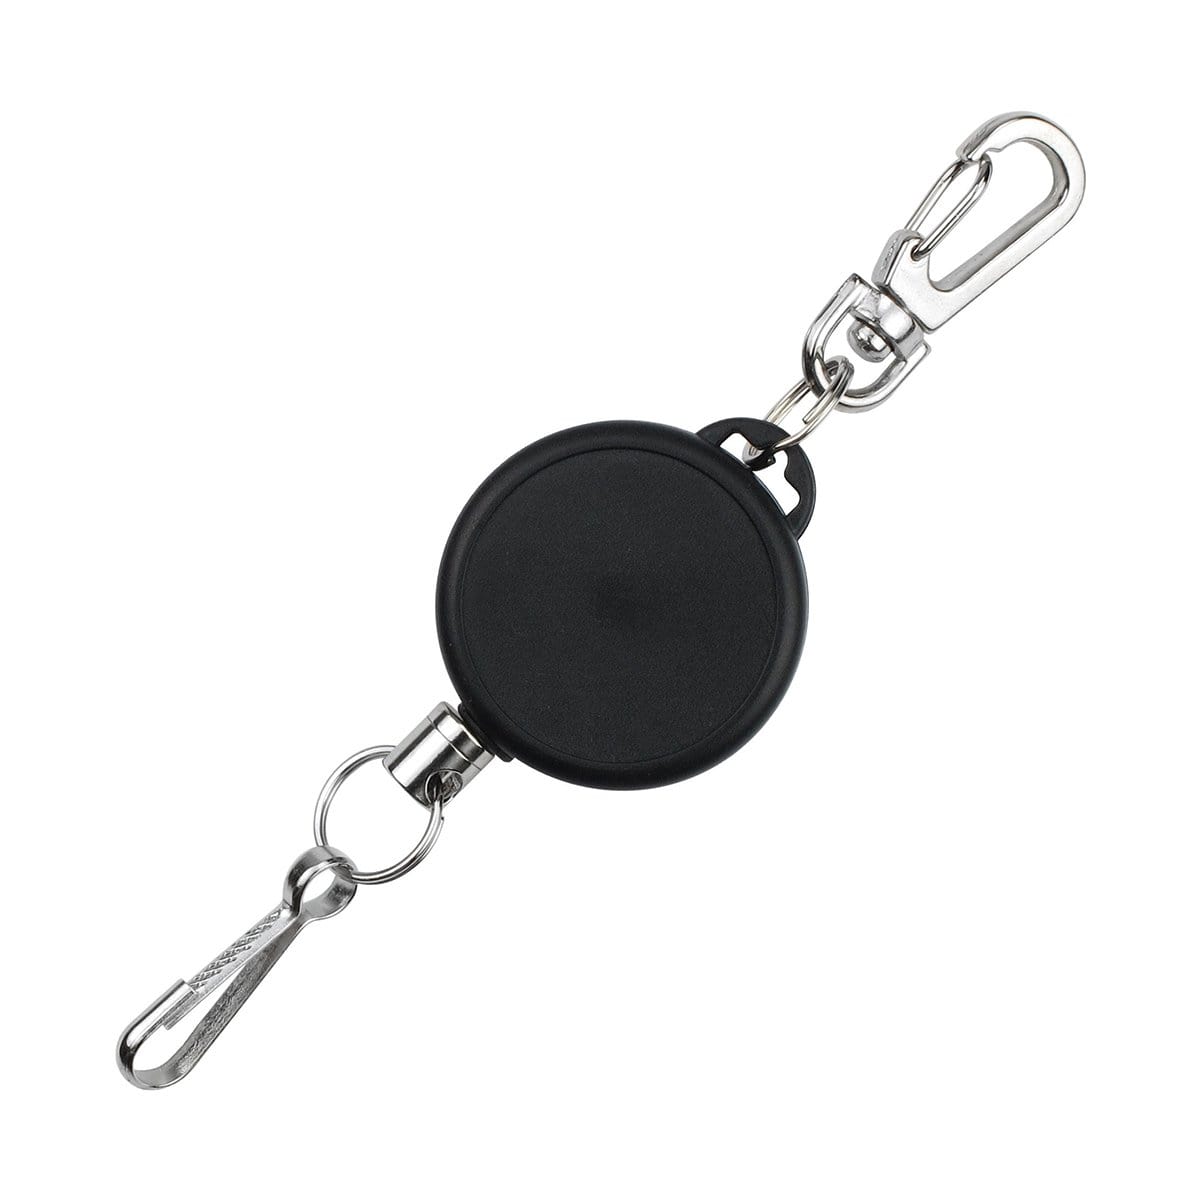 ID Neck Strap Lanyard, ID Card Holder & Retractable Reel Pass